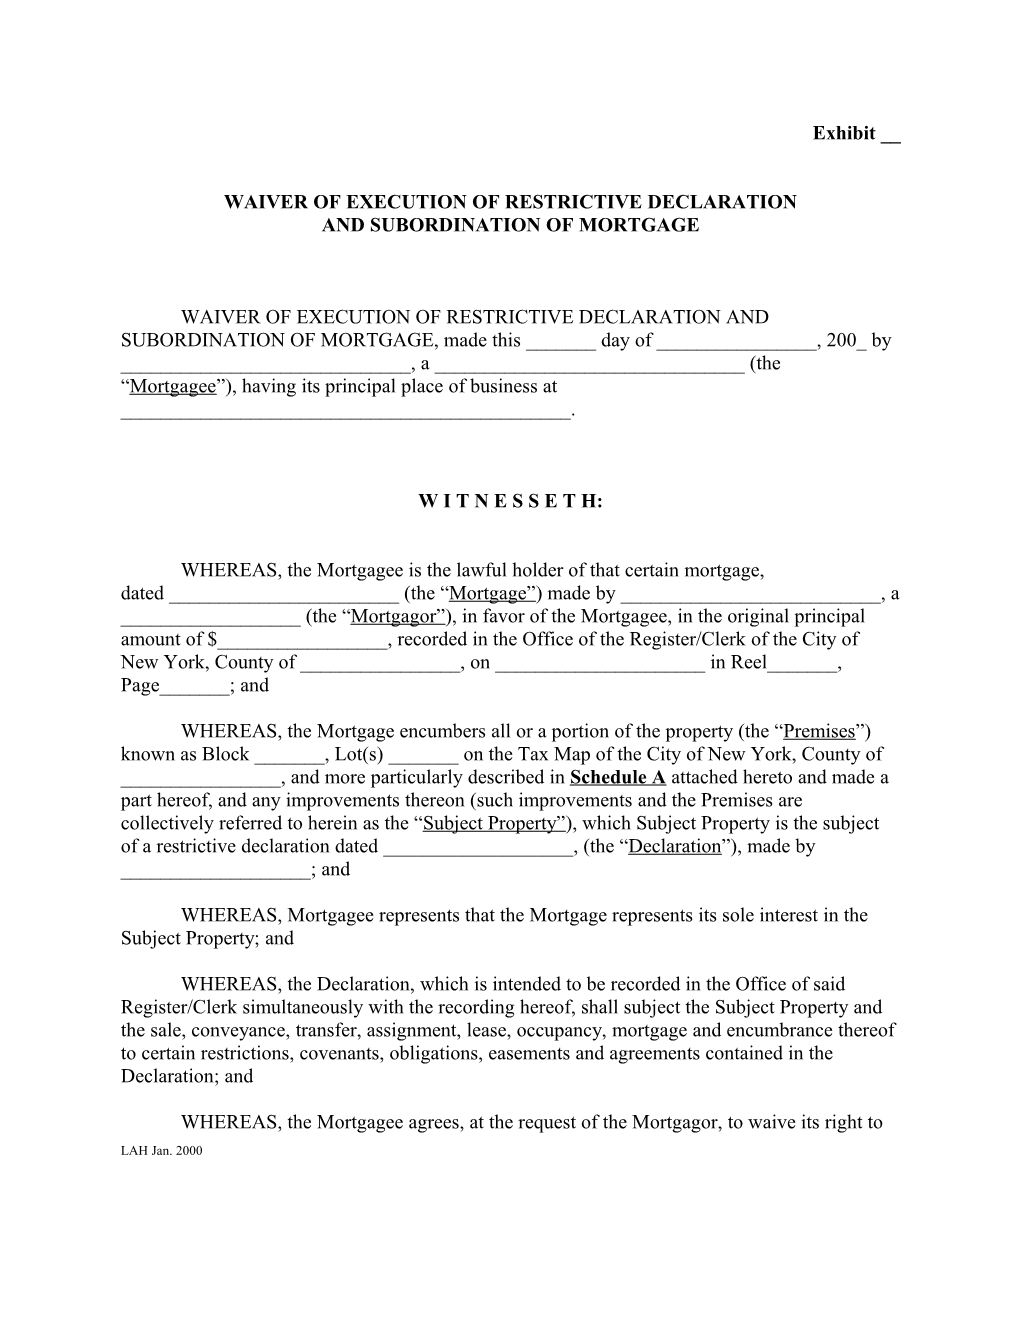 Waiver of Execution of Restrictive Declaration